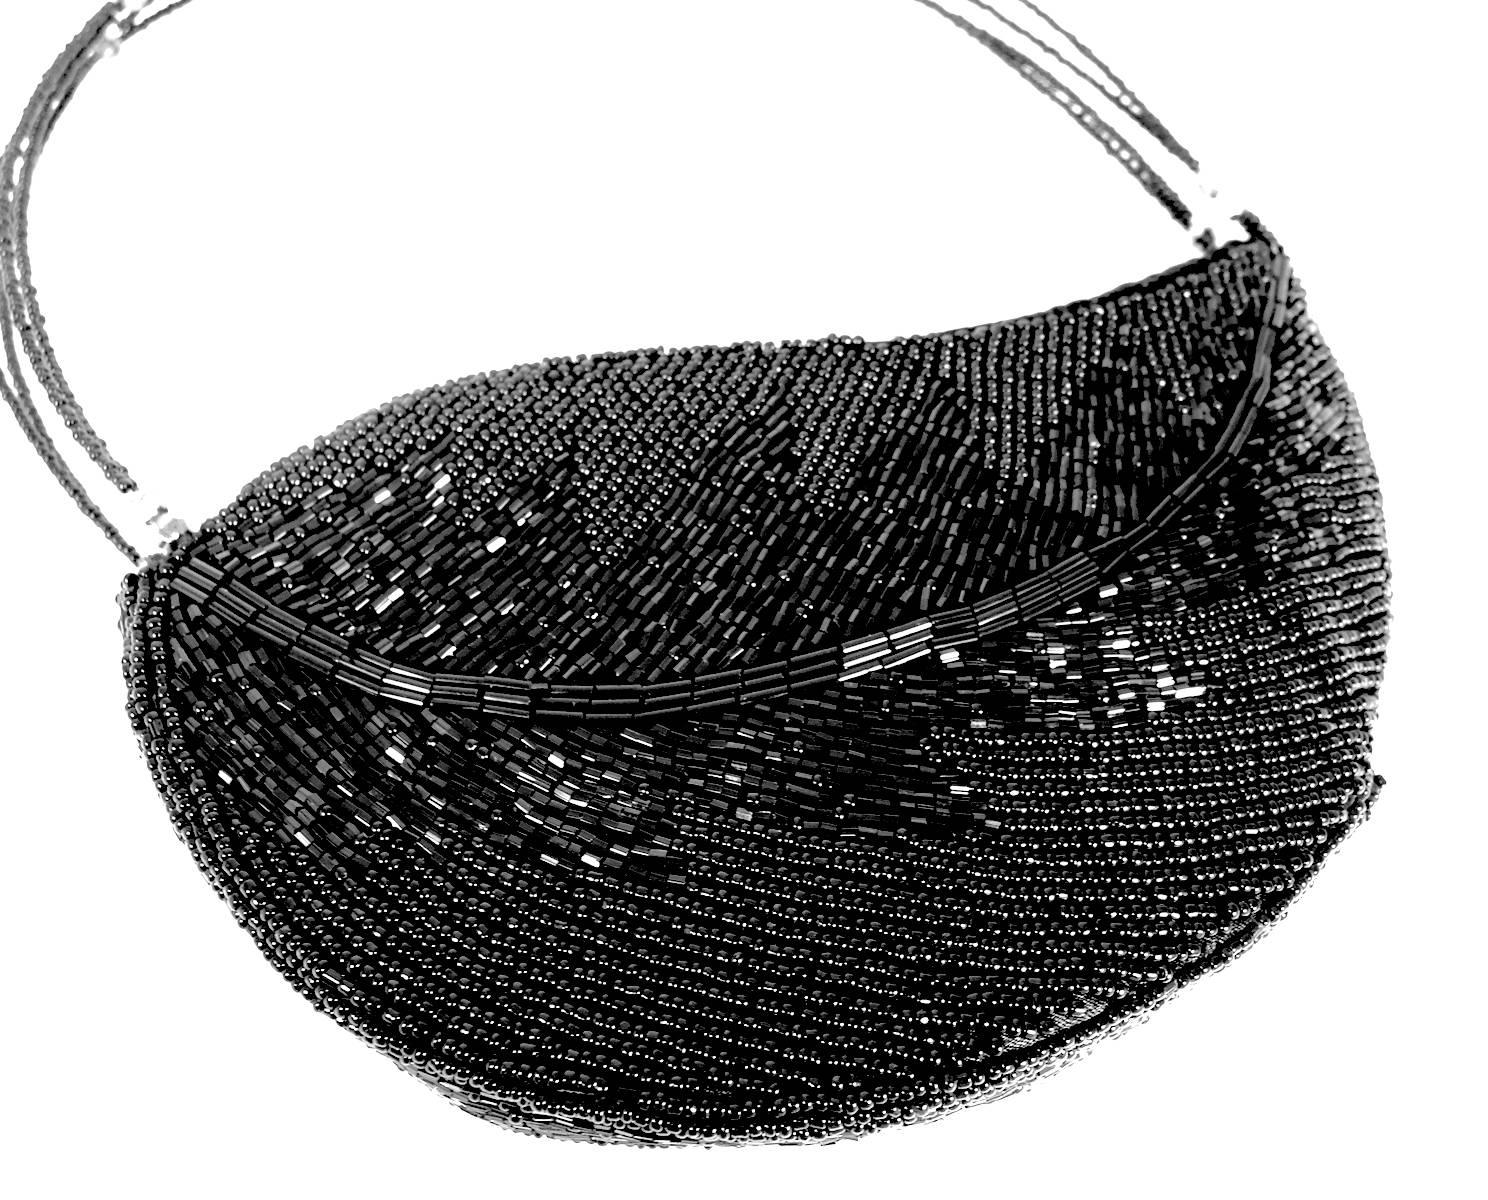 This very elegant leaf shaped handbag is set in dazzling black bugle beads and will make a perfect addition for any occasion. The handles are made with thin wire decorated with bugle beads and Aurora Borealis glass beads. This bag measures 8” x 5”.